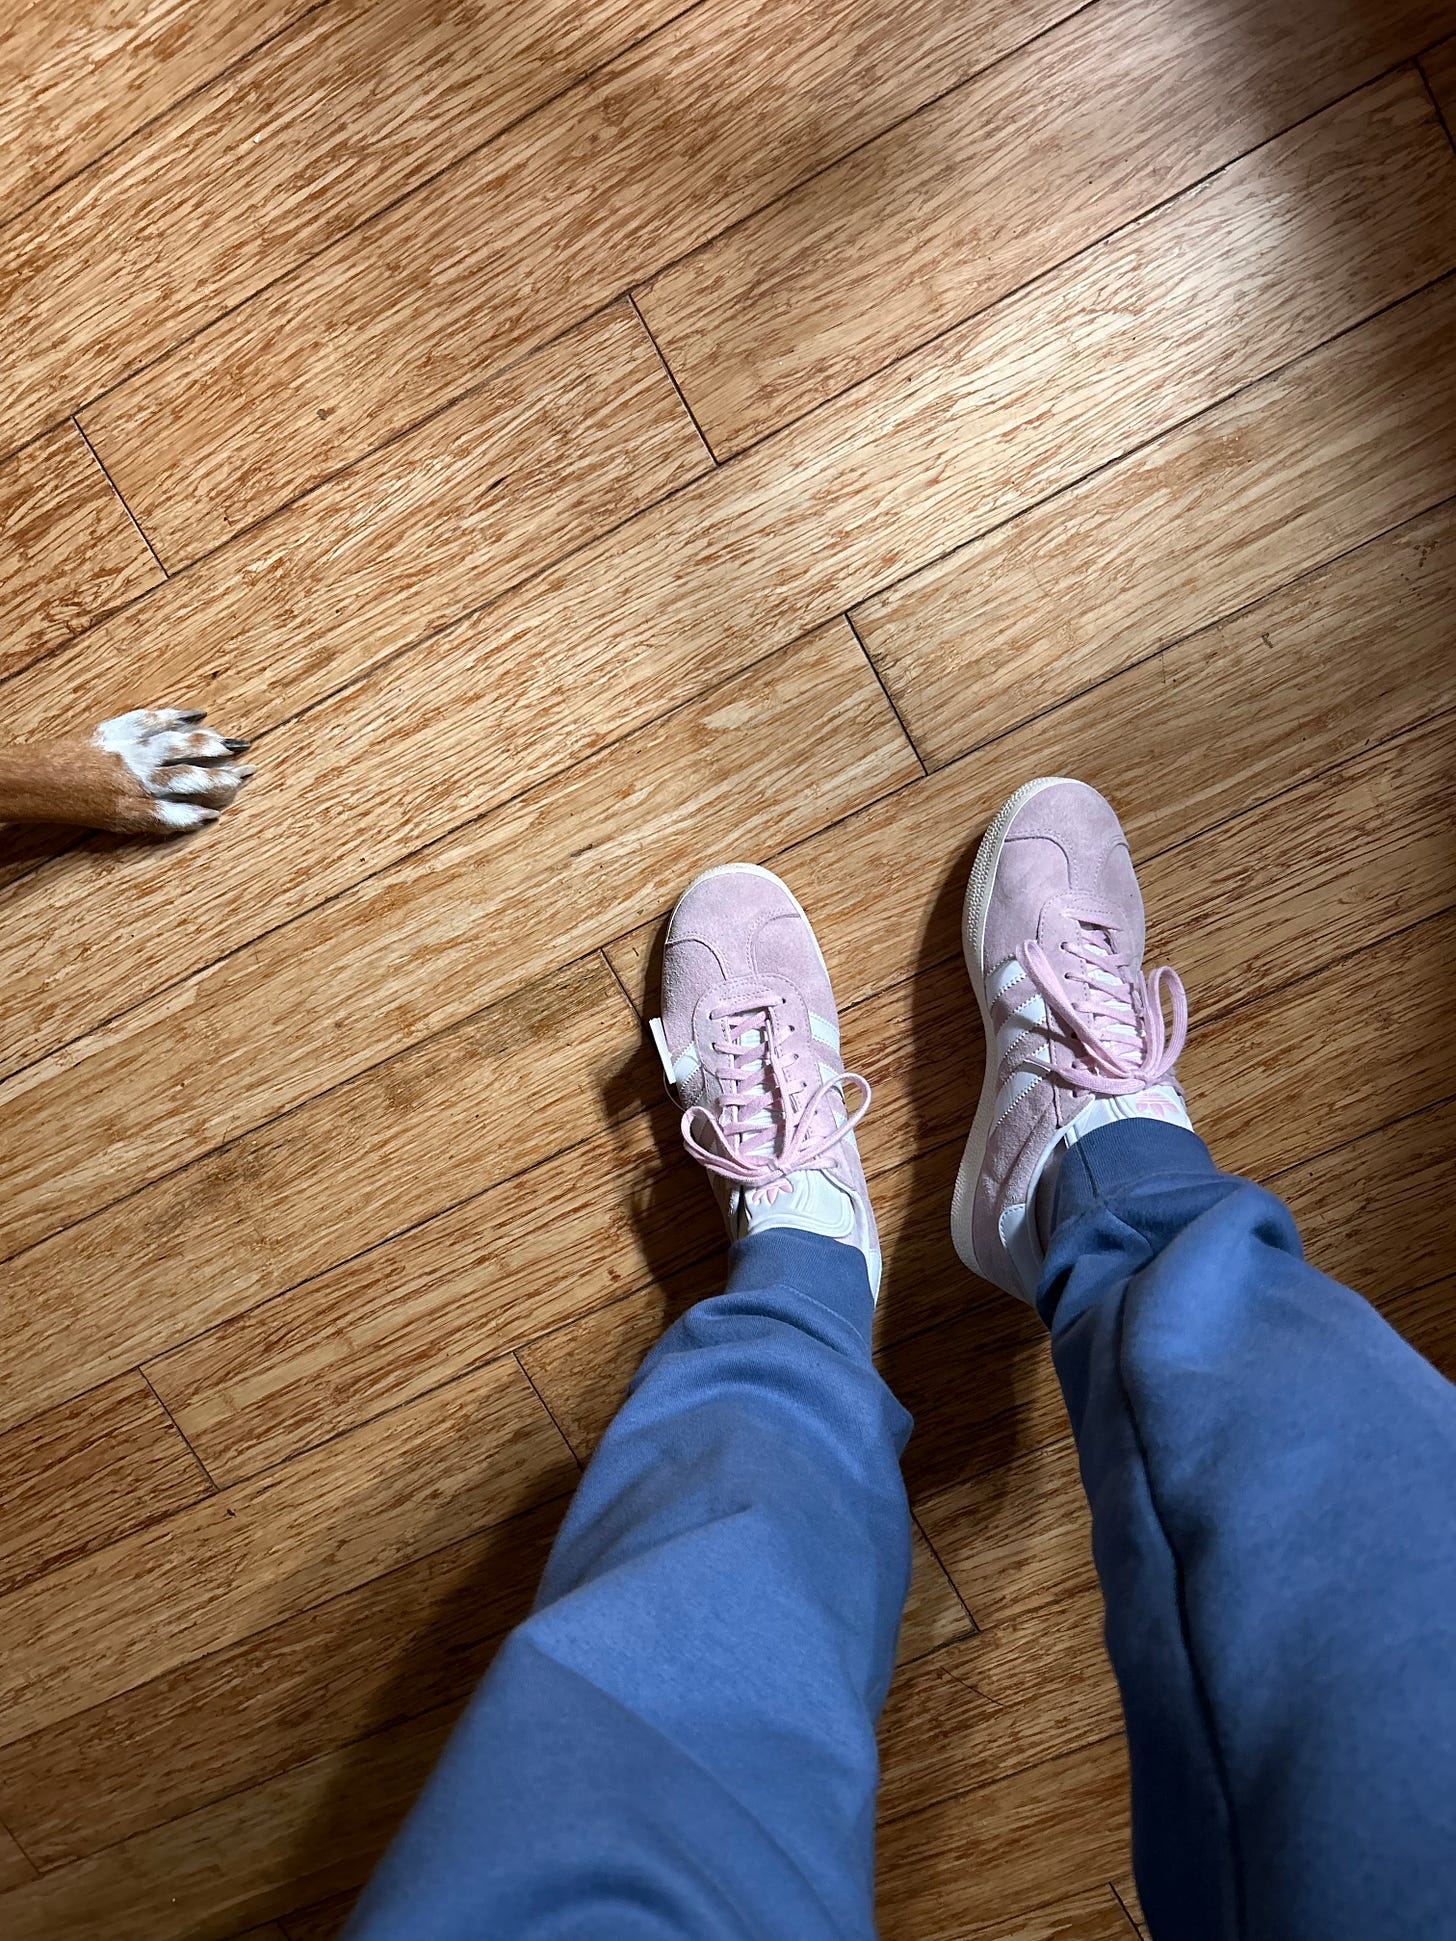 A picture of mary's feet  in her thrifed pink adidas gazelles. She has on blue joggers. Next to her feet is a white and brown dog paw.